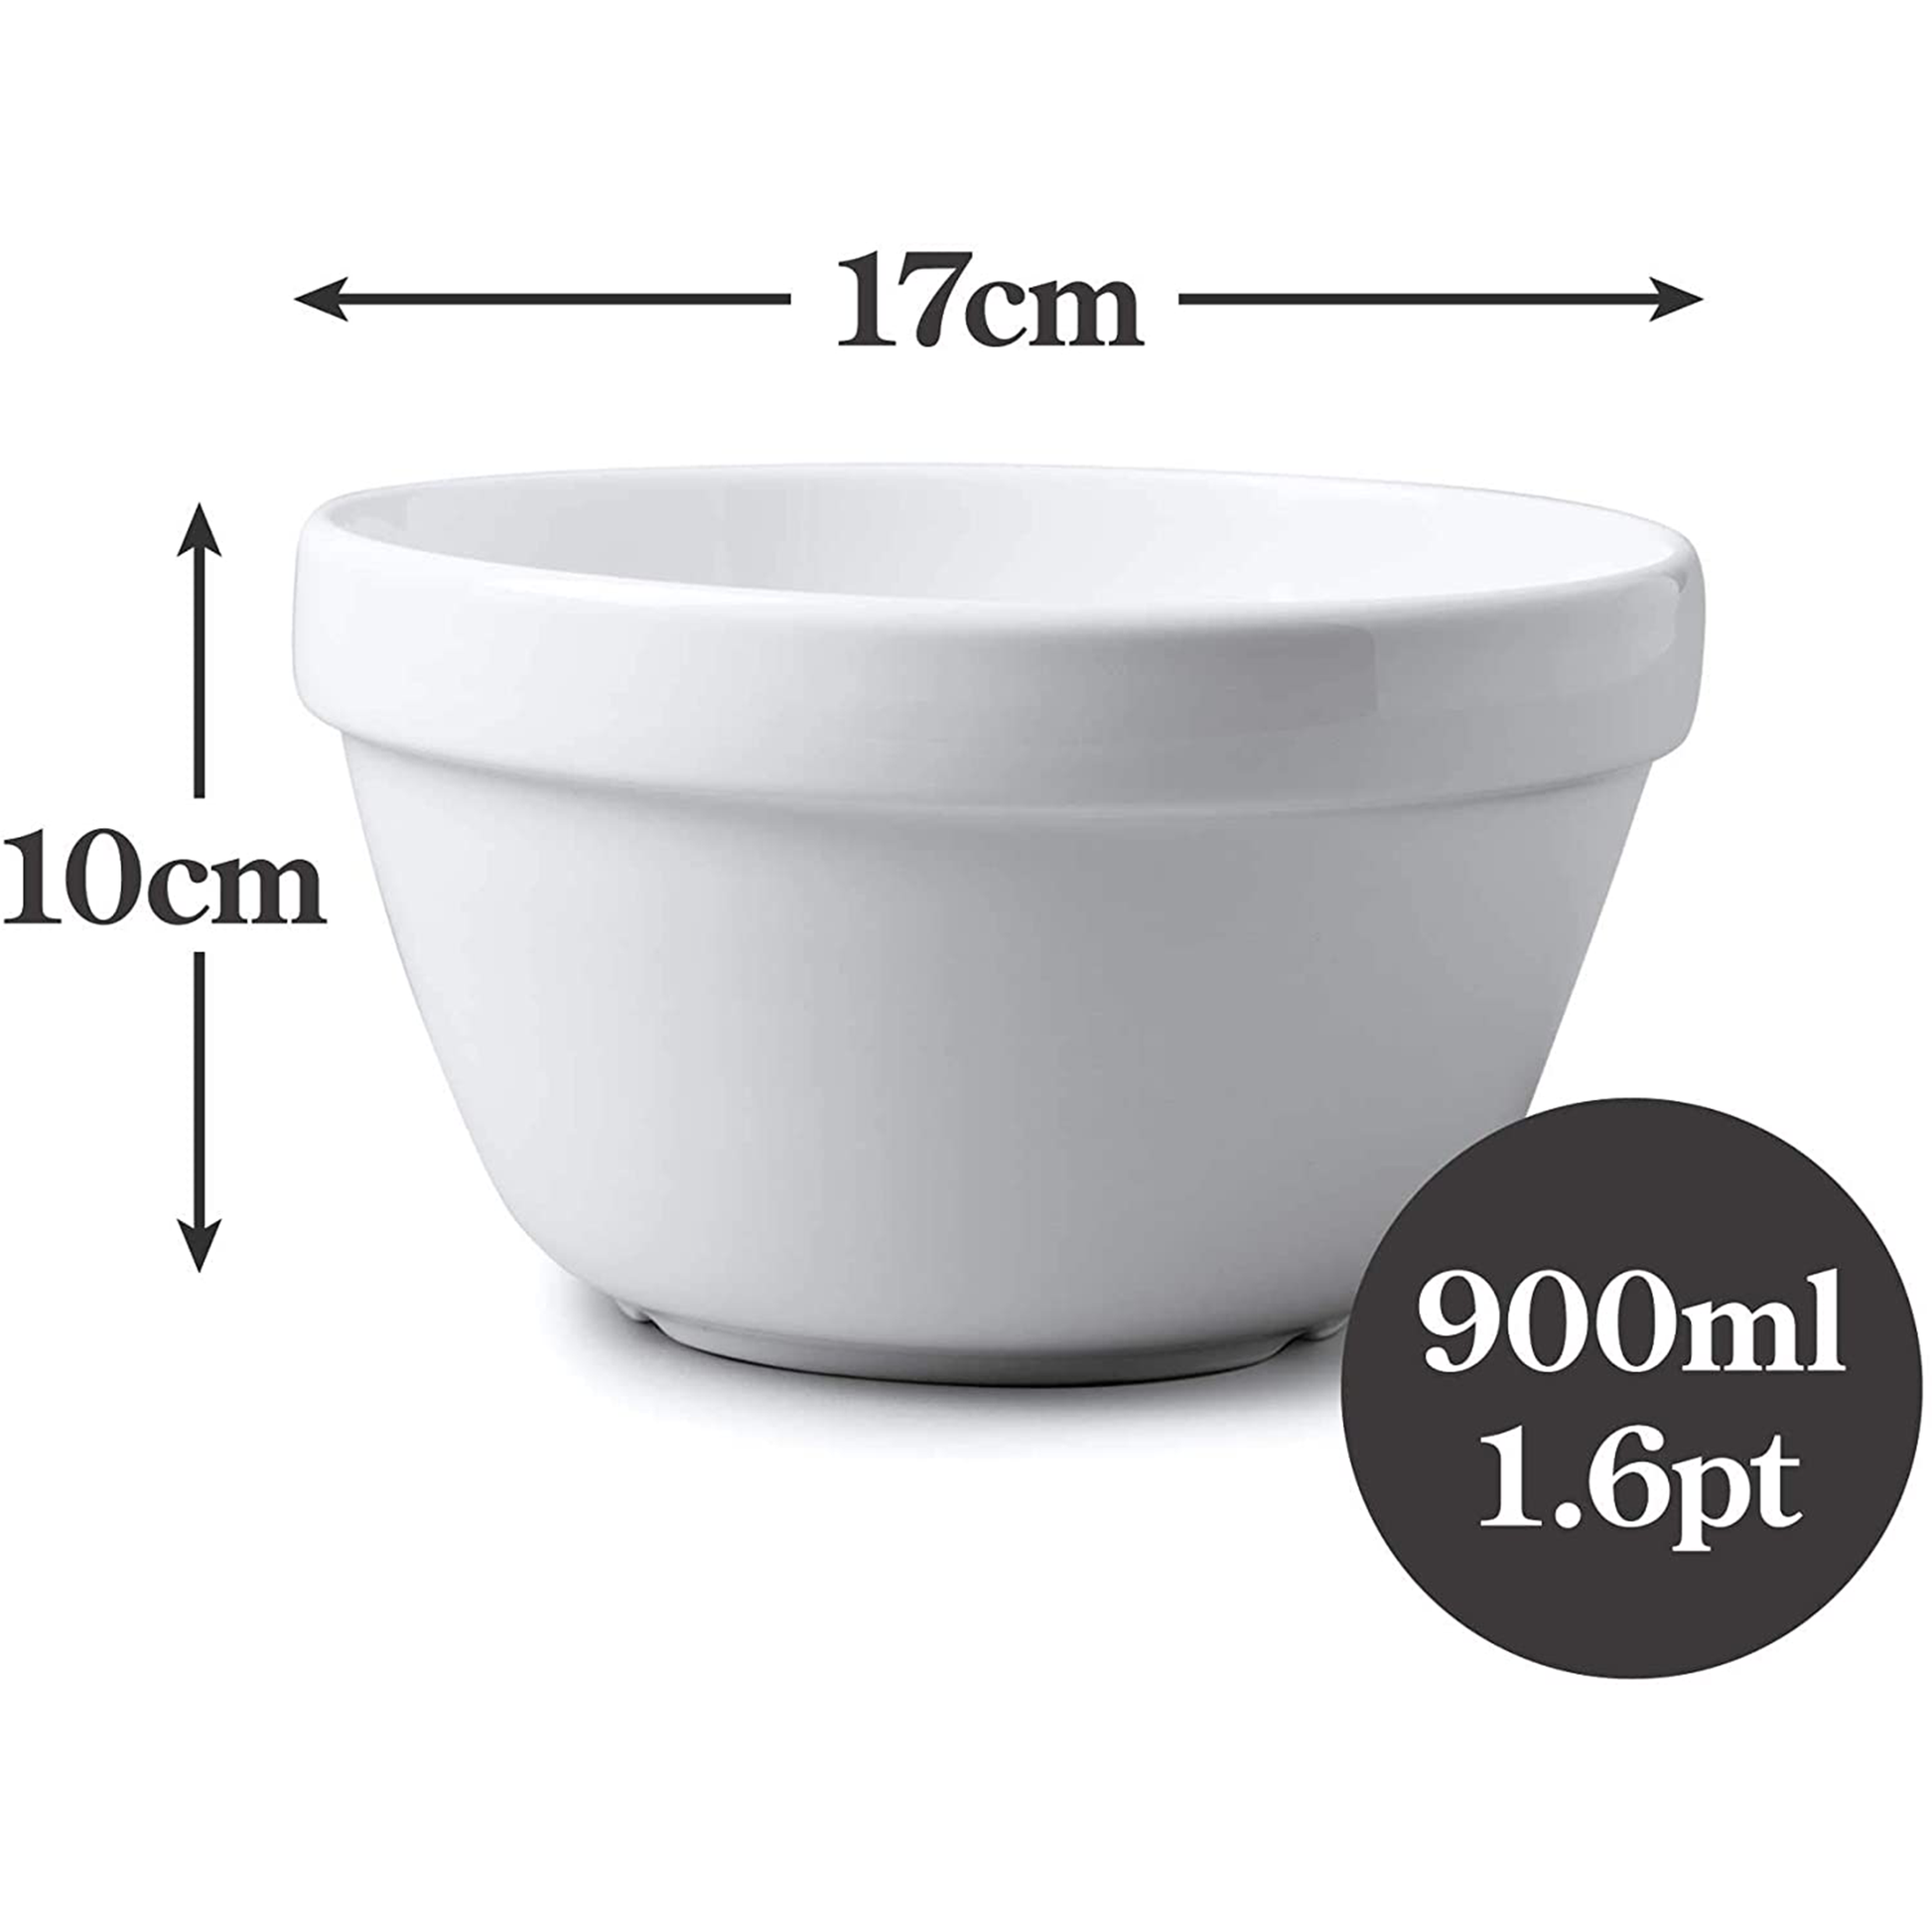 an image depicting the dimensions of the bowl